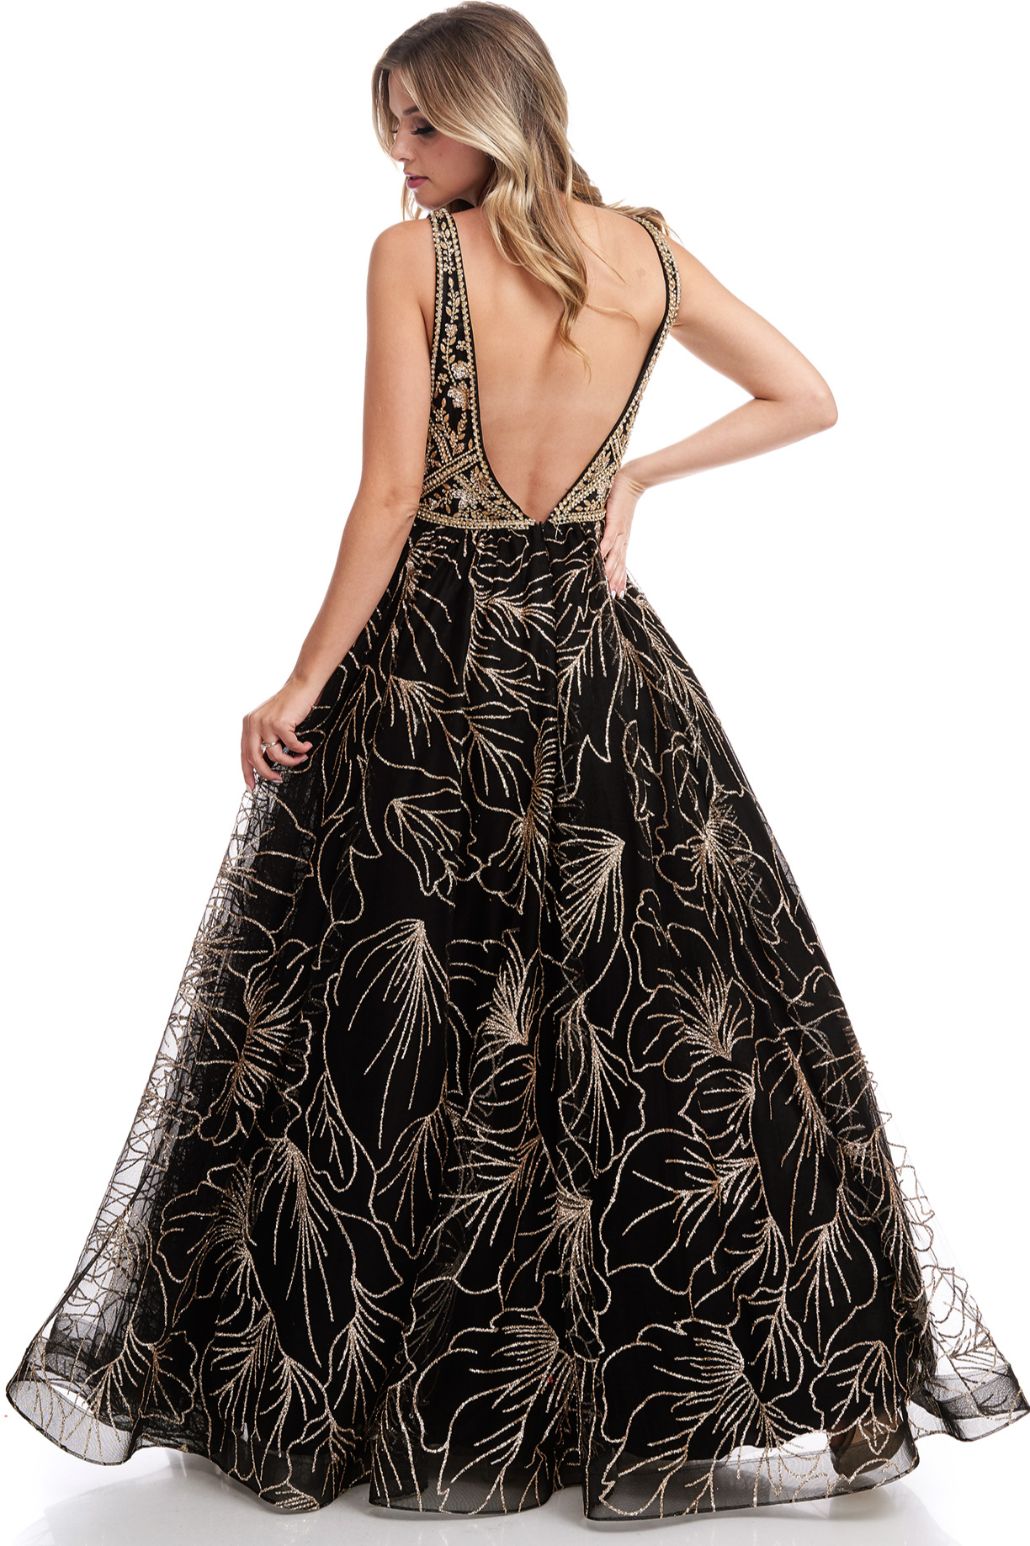 Black and gold | Gowns, Indian fashion dresses, Gowns dresses